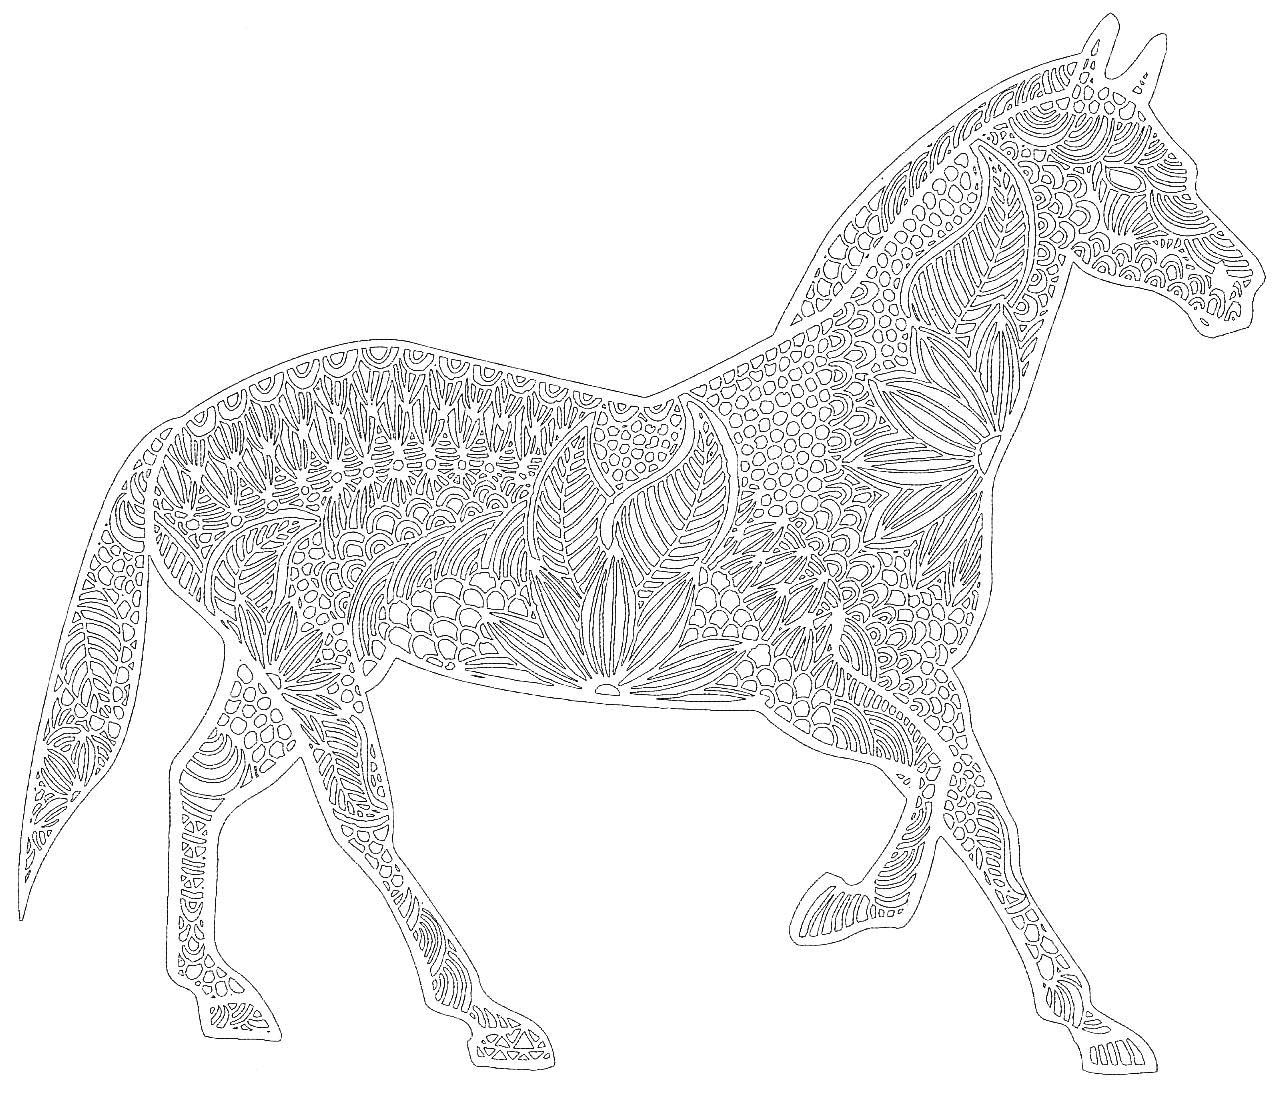 Horse in patterns